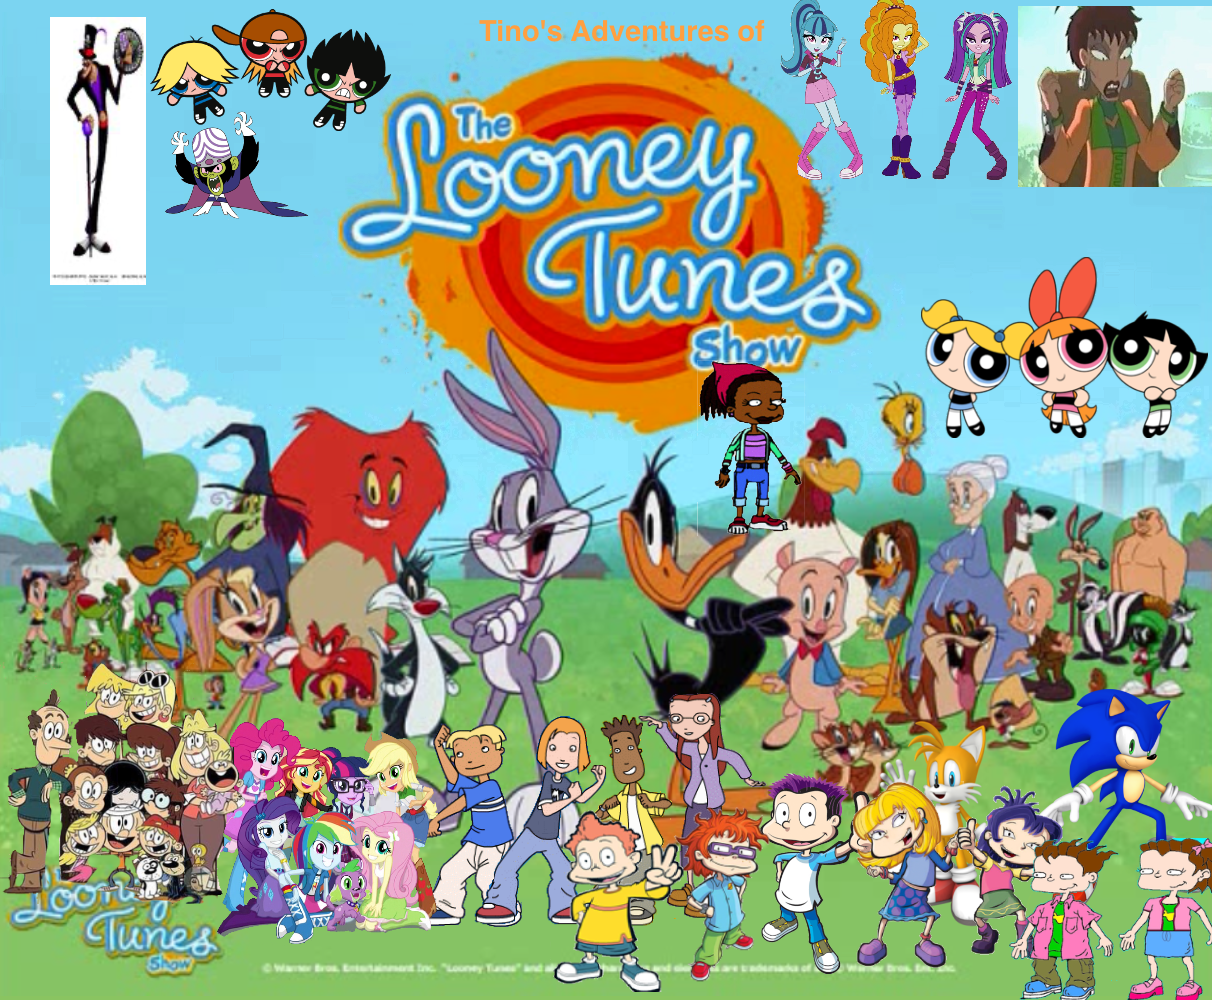 Tino's Adventures of The Looney Tunes Show, Pooh's Adventures Wiki